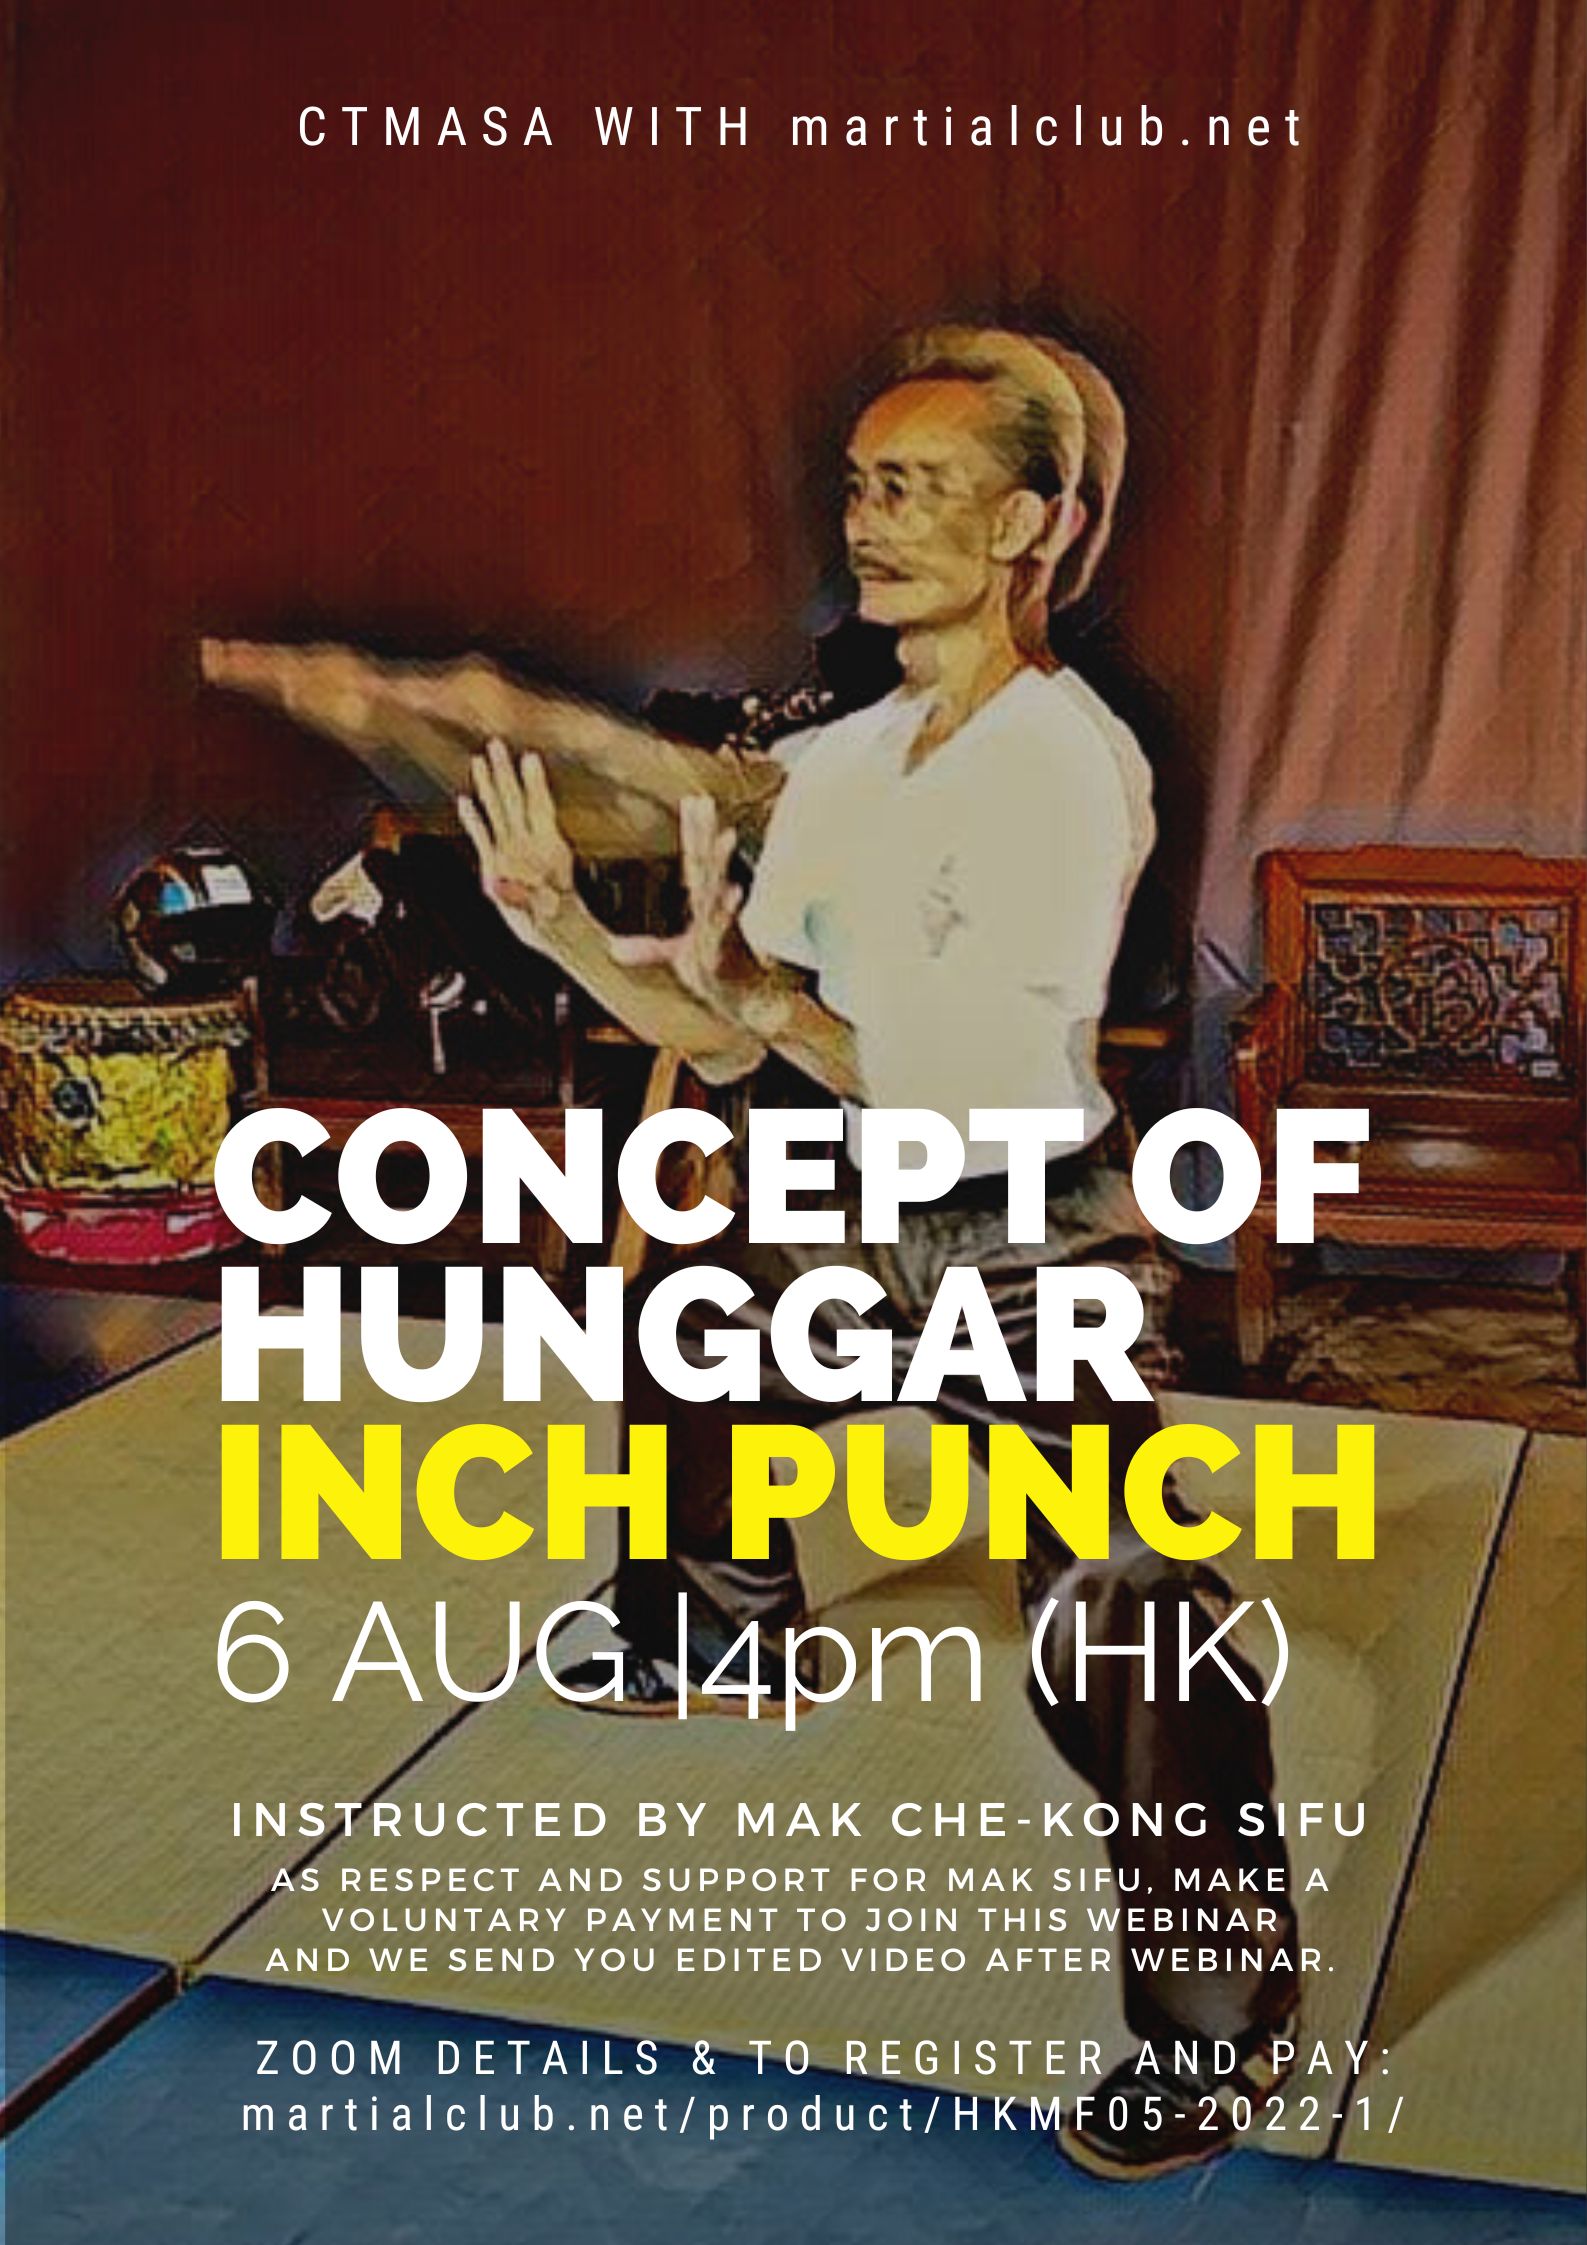 Concept of Hunggar Inch Punch